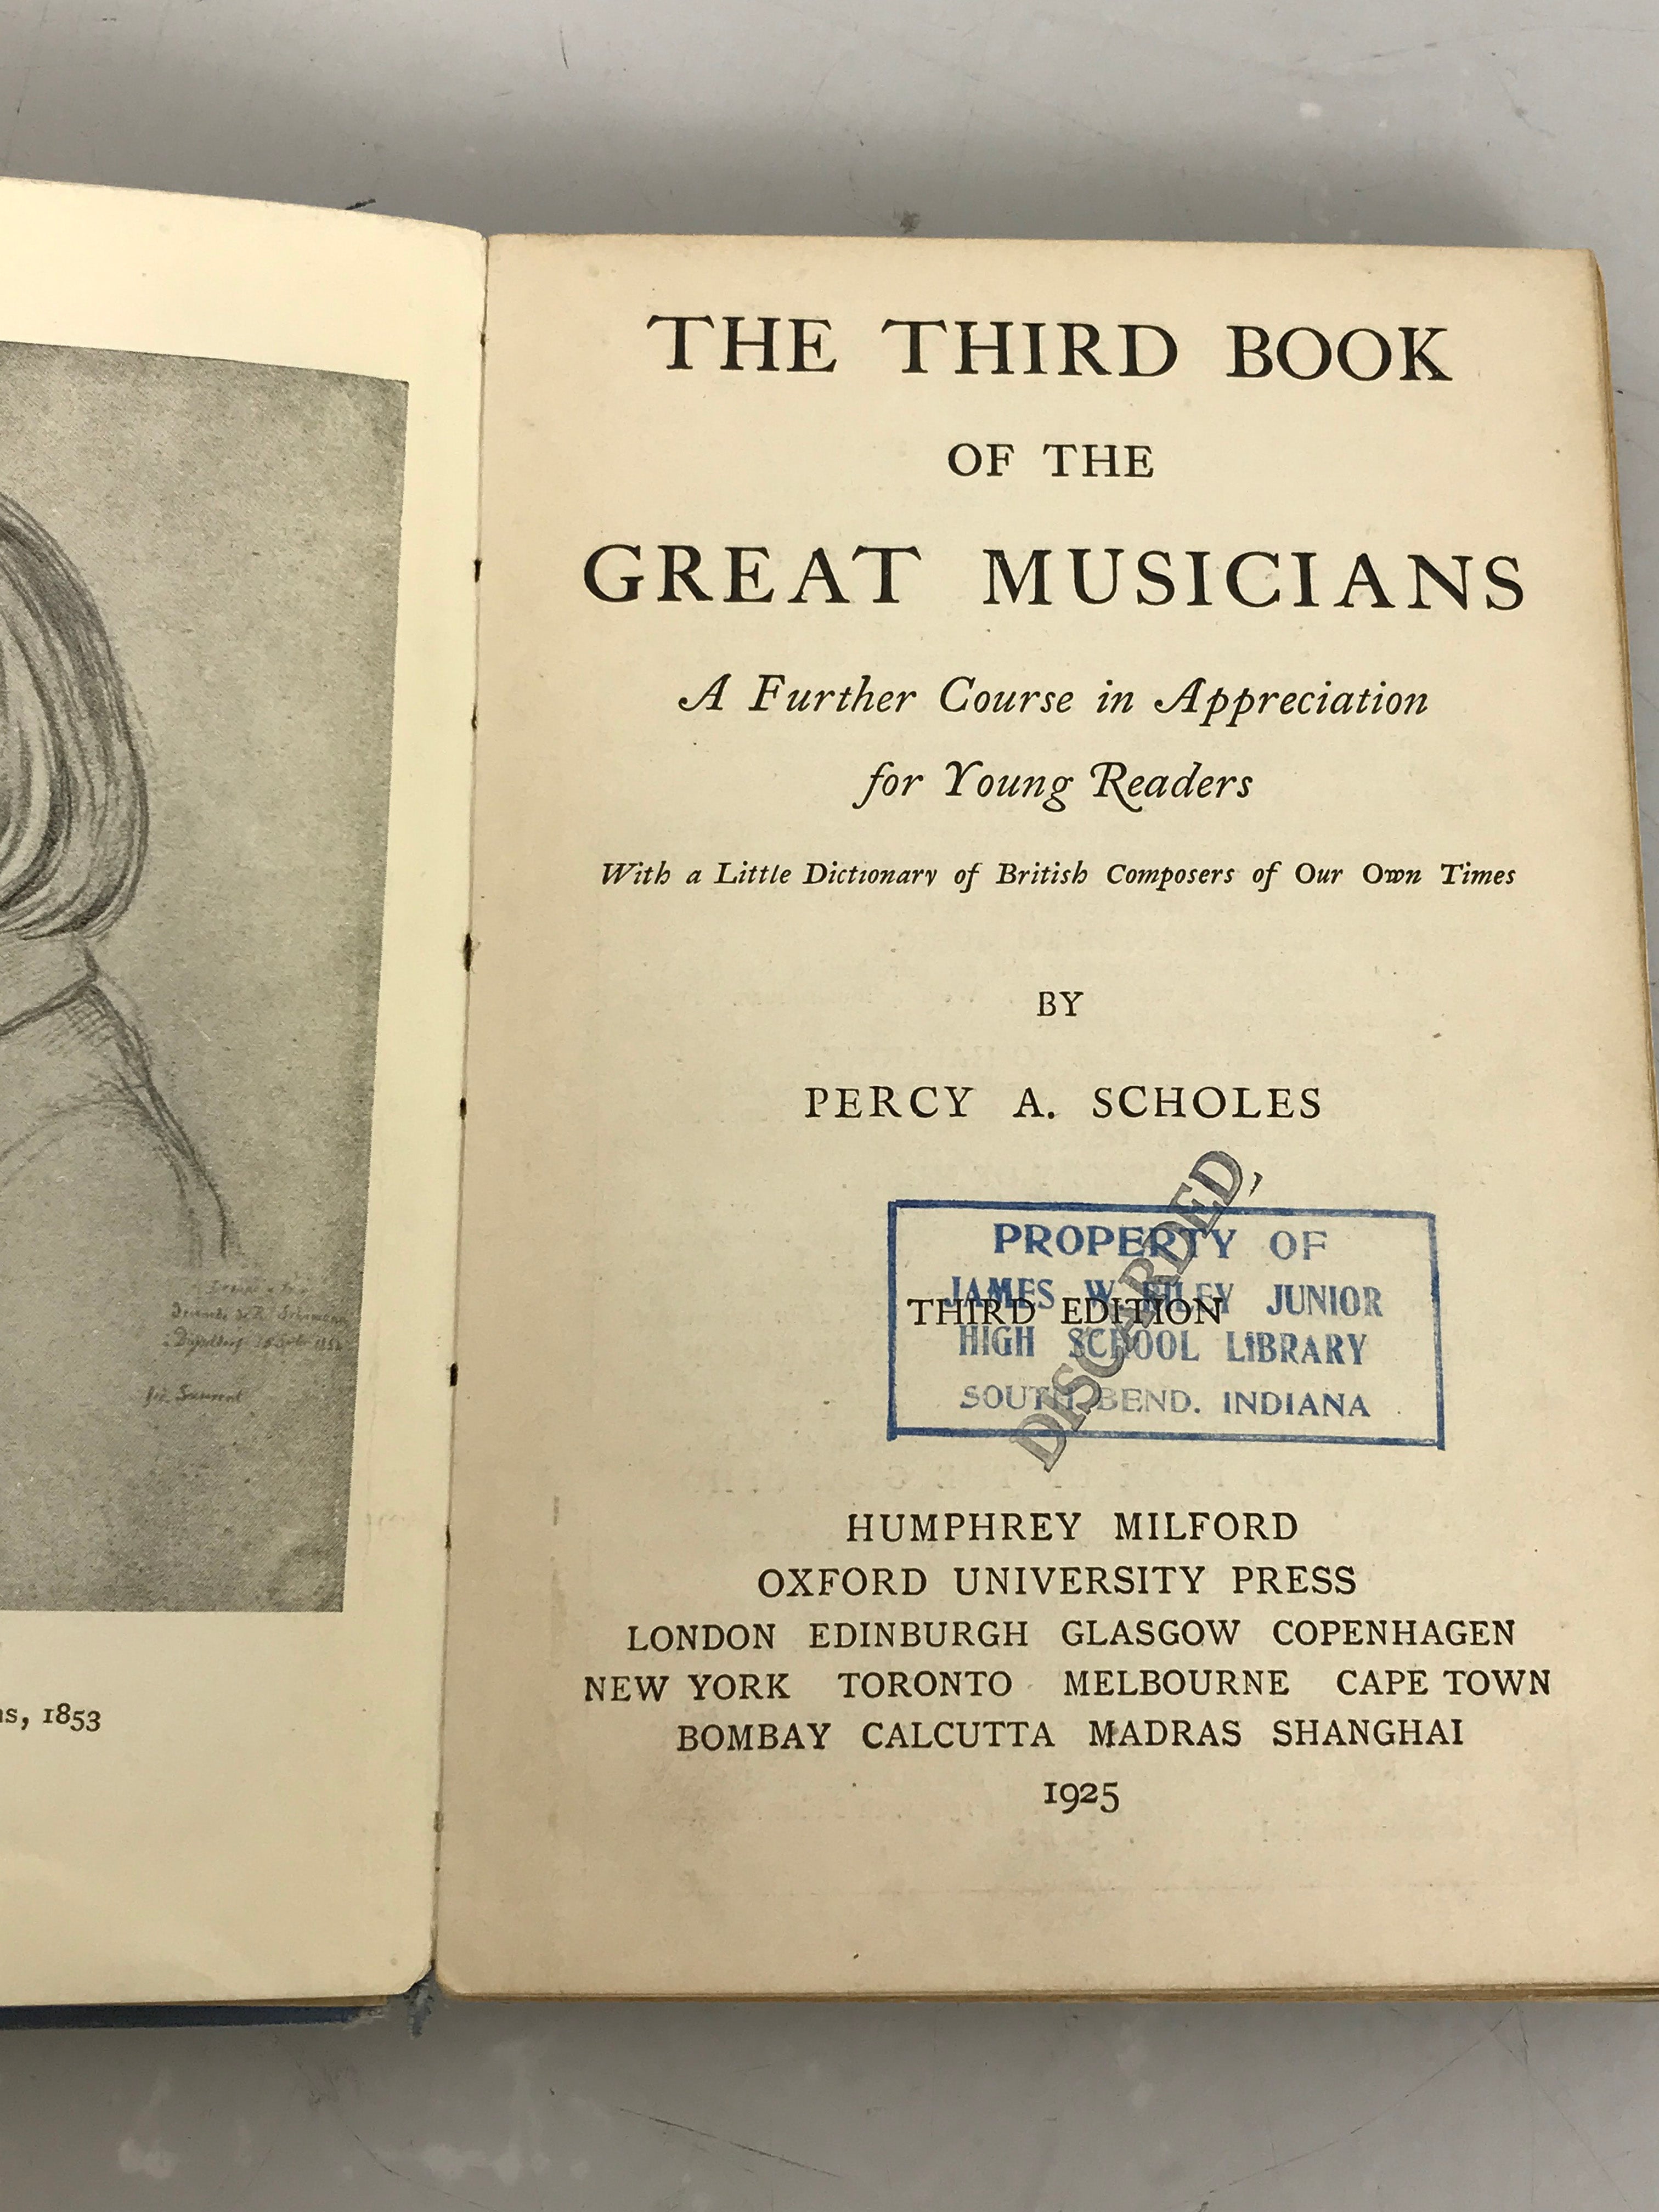 The Third Book of the Great Musicians Percy Scholes 1925 HC